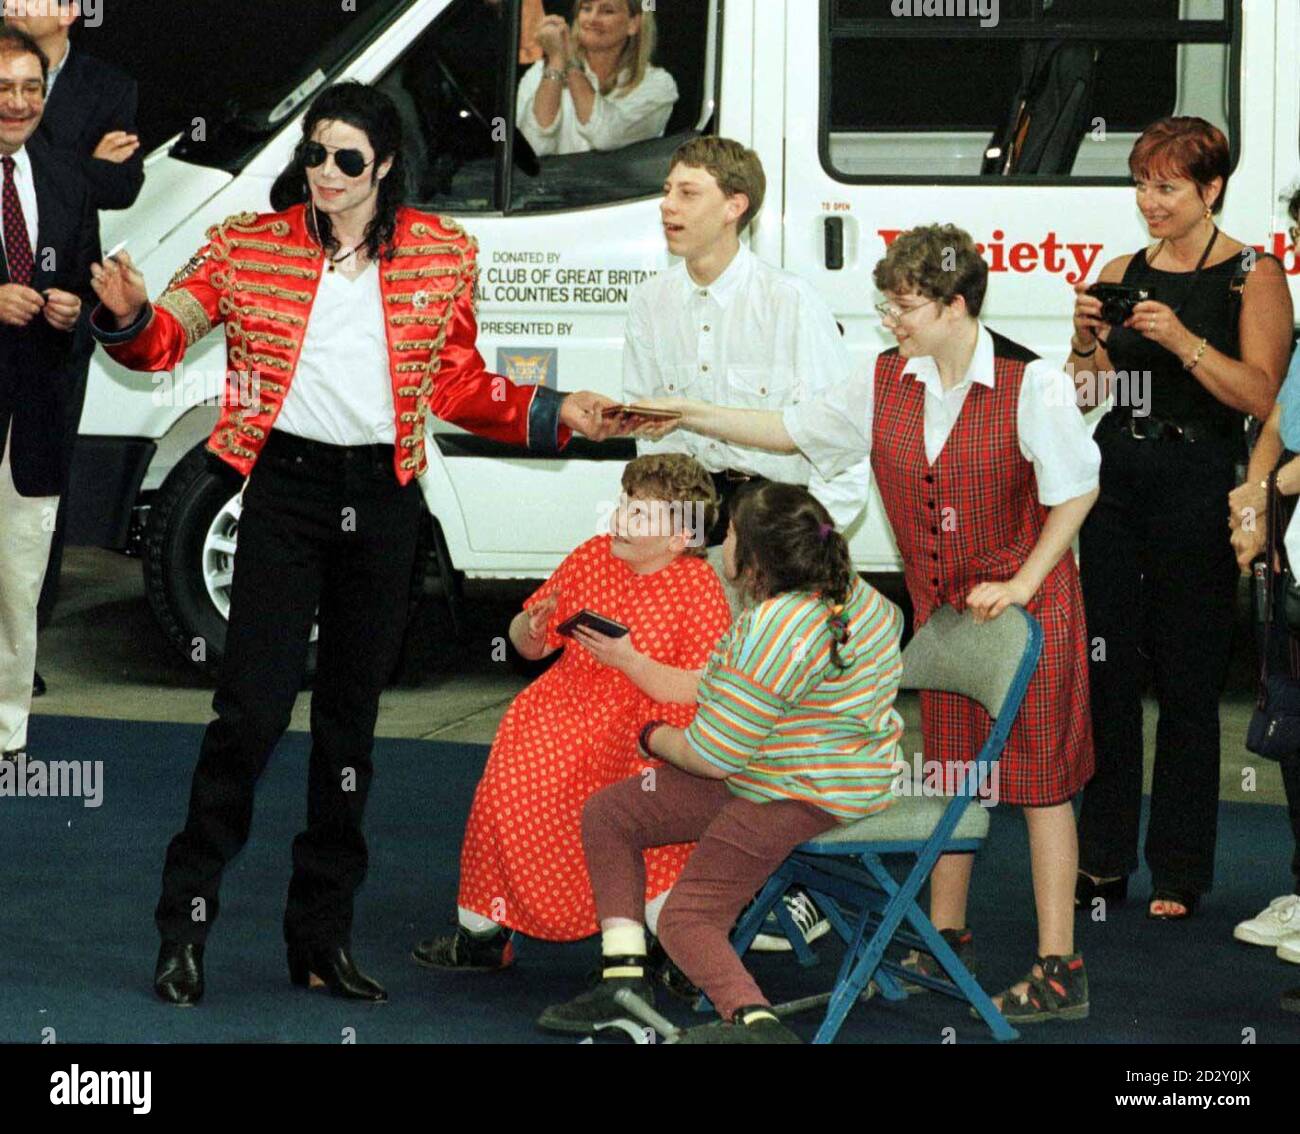 American super star Michael Jackson pictured during the handing over of Sunshine Coaches on behalf of the Variety Club of Great Britain, his wife Debbie Rowe can be seen enjoing the spectacle through the window of one of the minibuses in Sheffield, today (Wednesday). Photo by Owen Humphreys/PA. Stock Photo